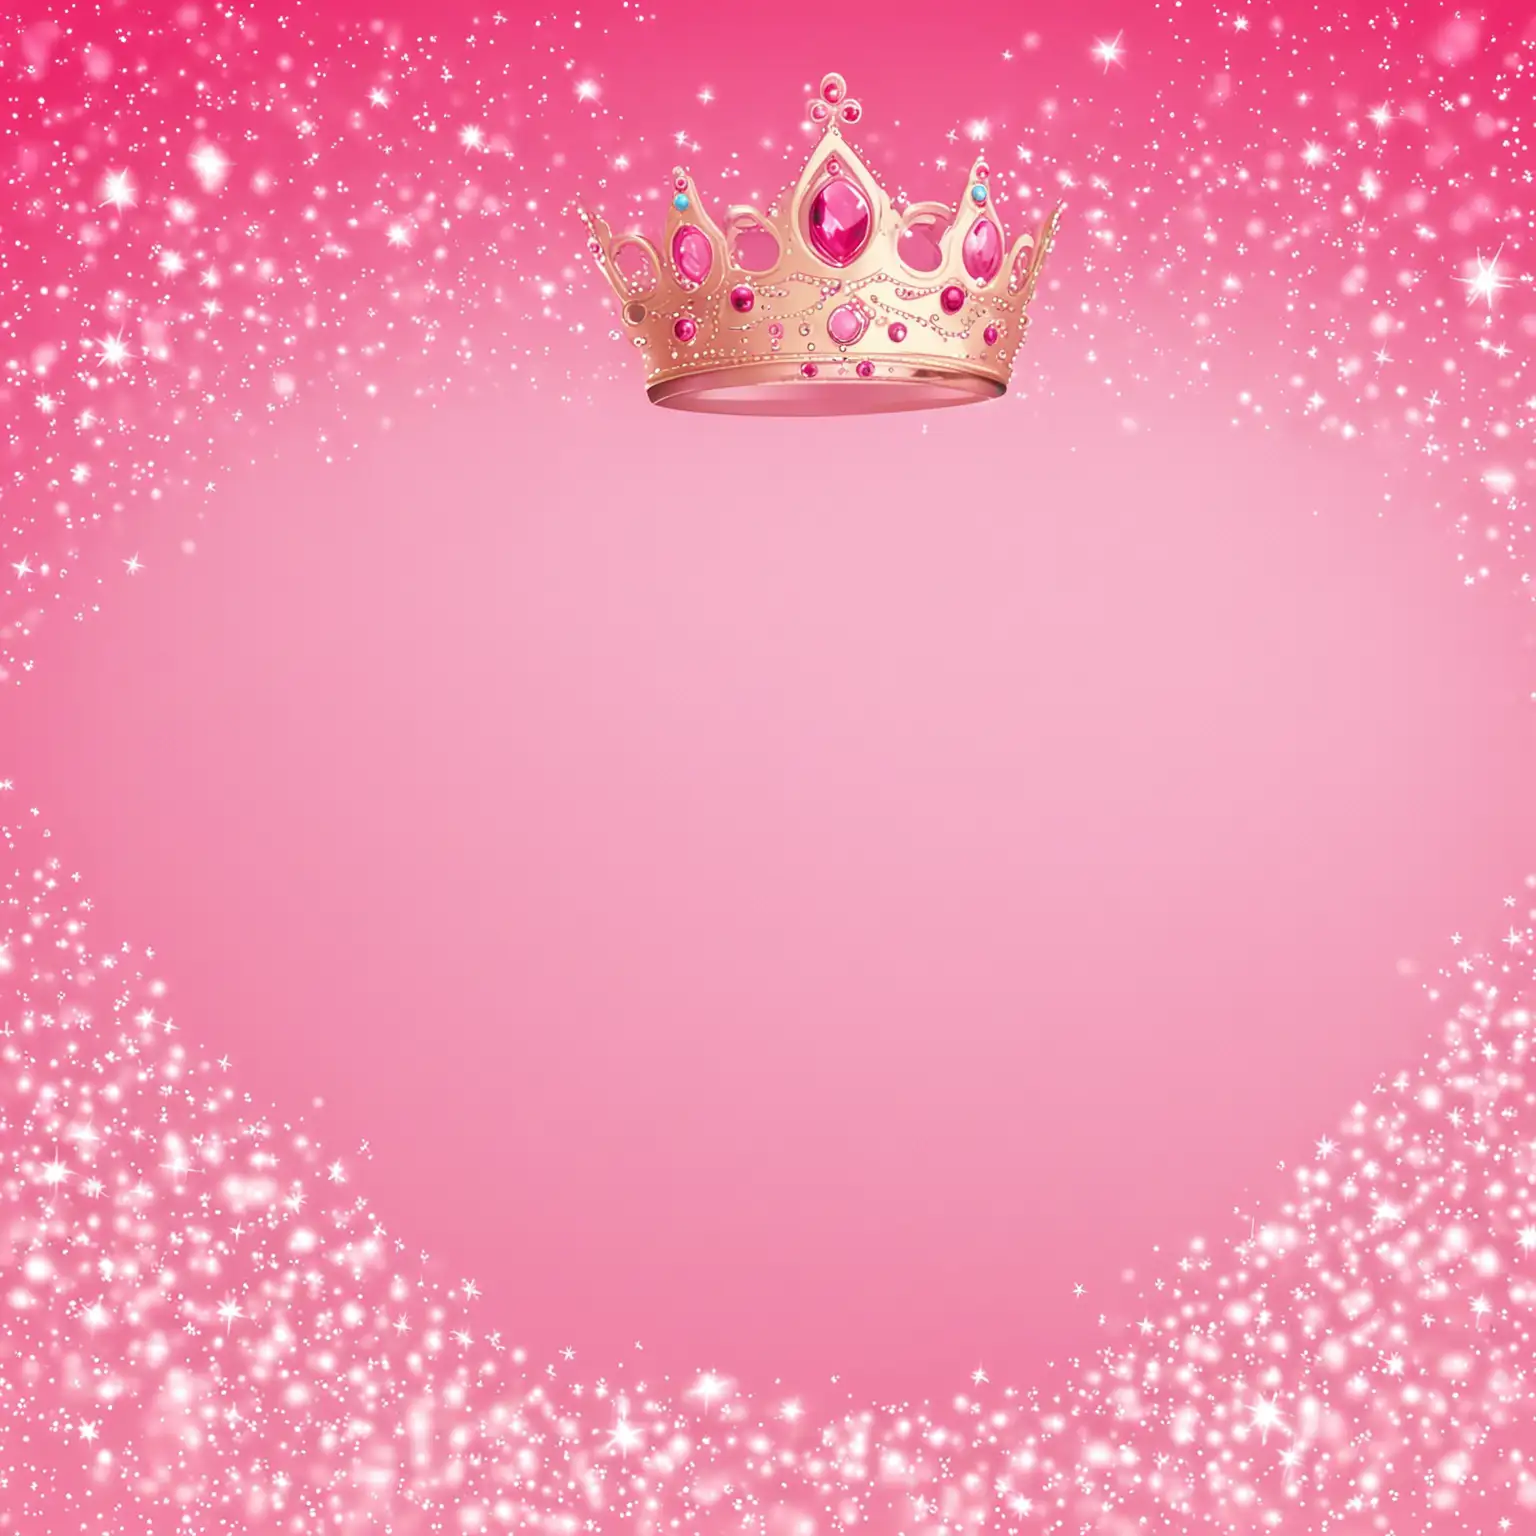 Enchanting Pink Princess Background with Sparkling Accents